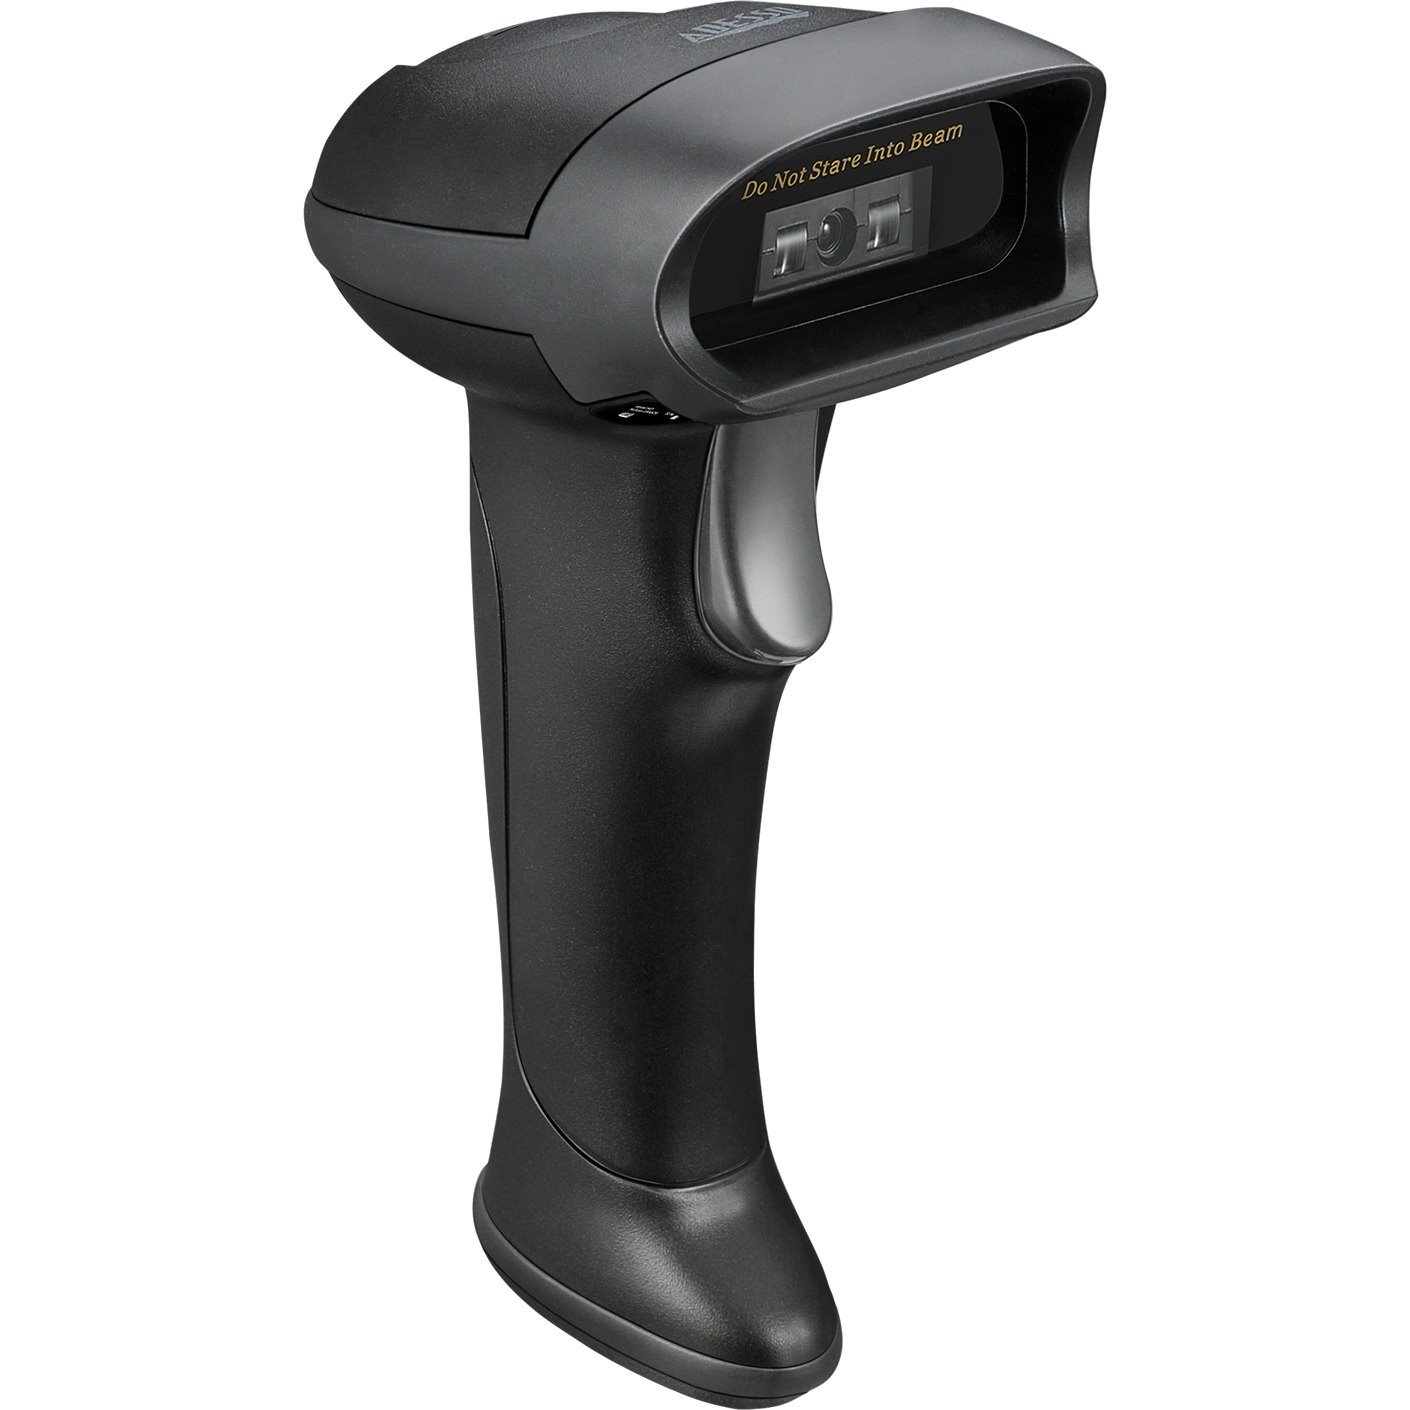 Adesso NuScan NuScan 2500CR Healthcare, Warehouse Handheld Barcode Scanner - Wireless Connectivity